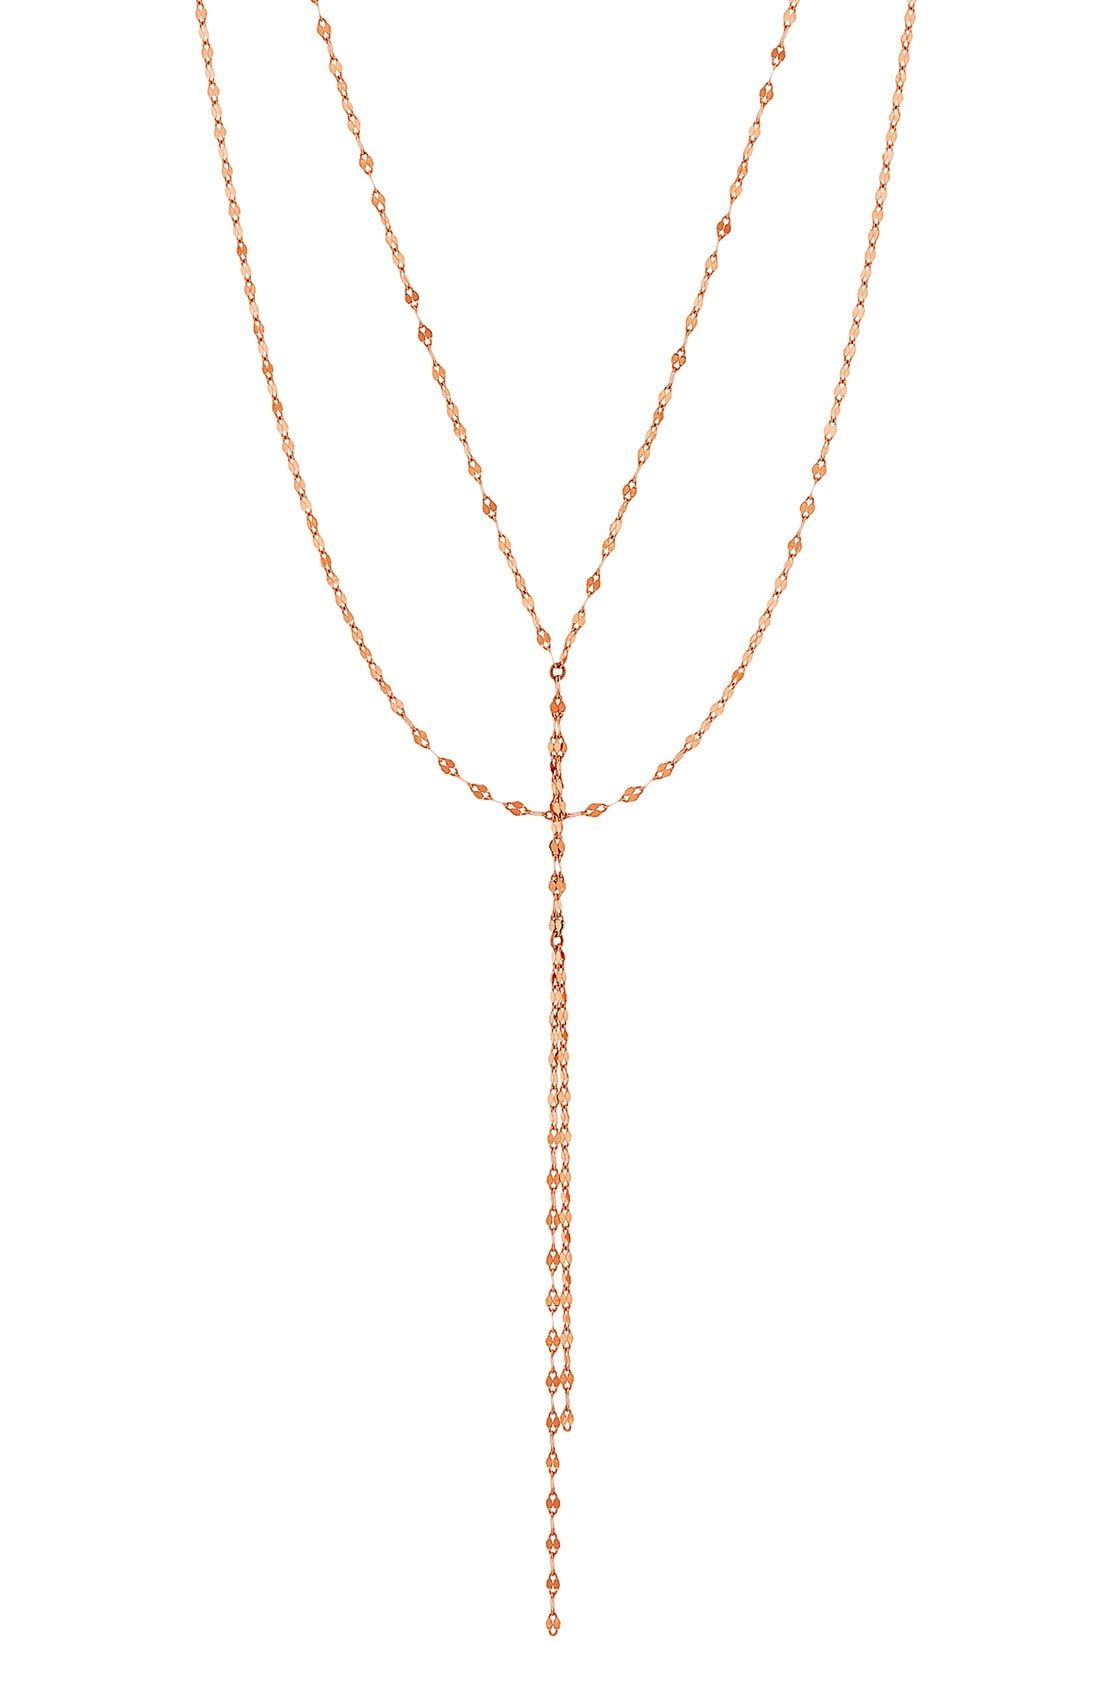 Women's Multi Strand Necklaces | Nordstrom Within Most Current Shimmering Snowflake Locket Element Necklaces (View 25 of 25)